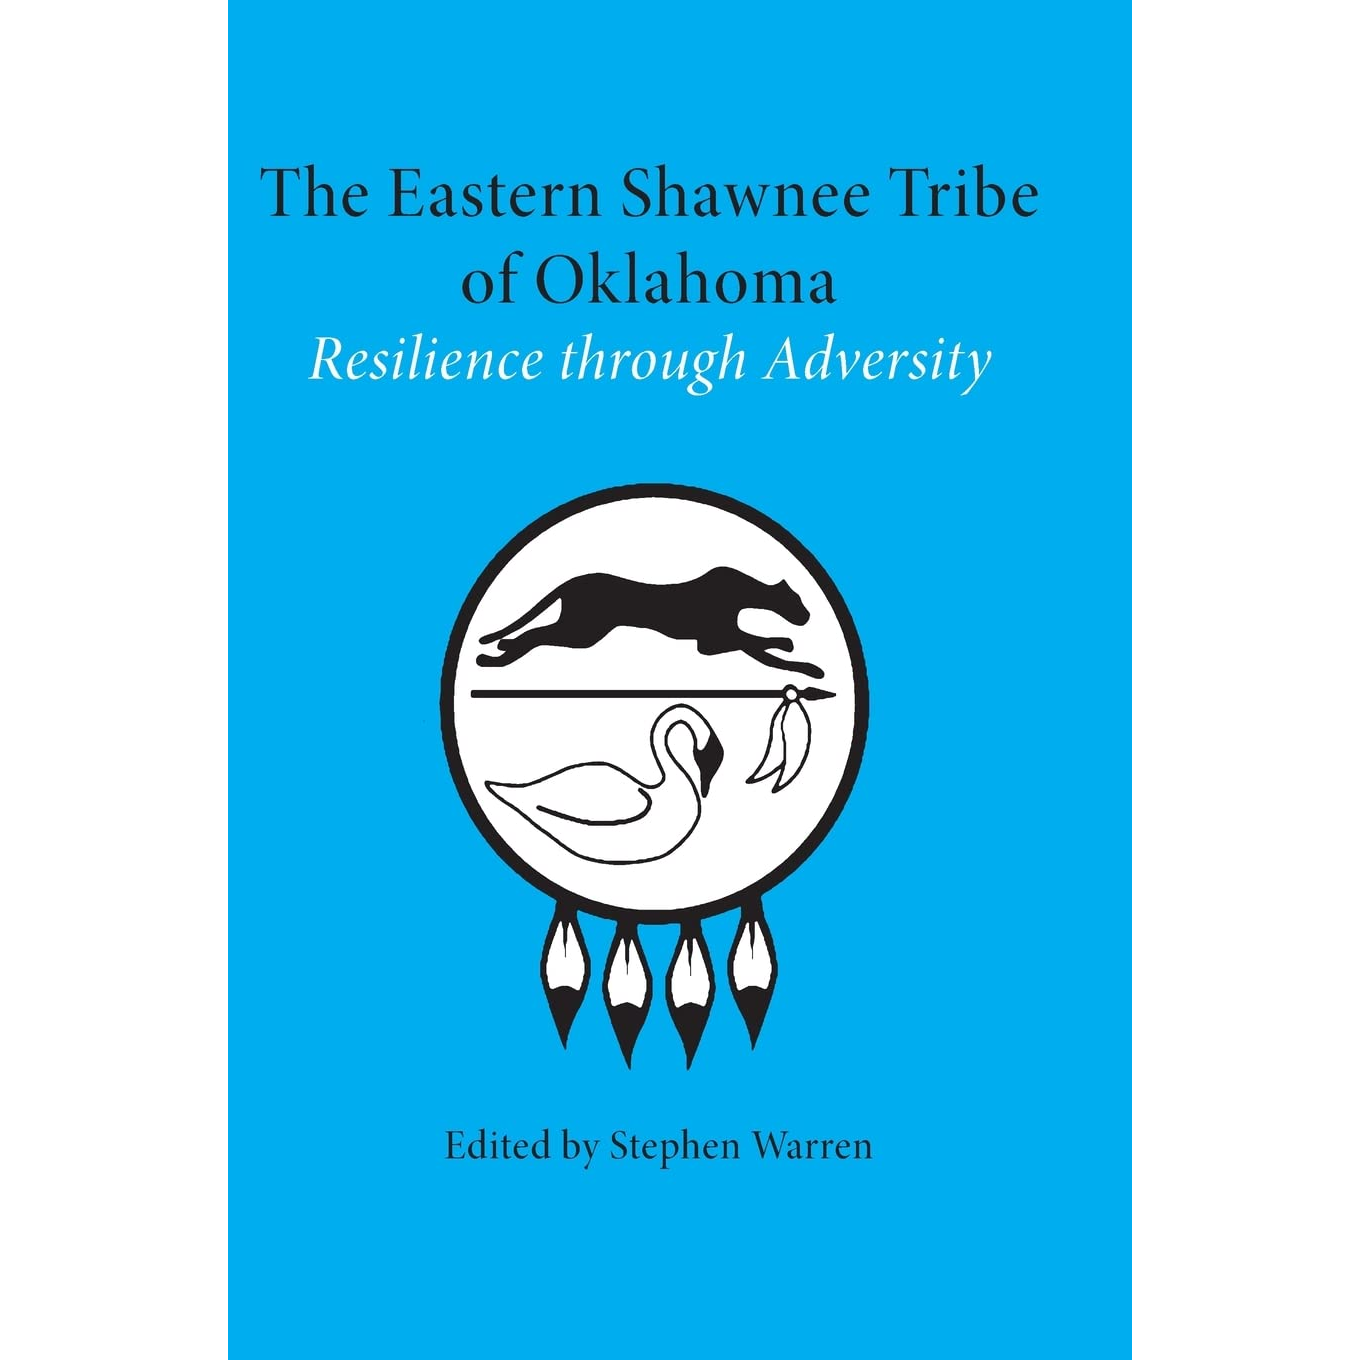 The Eastern Shawnee Tribe of Oklahoma: Resilience Through Adversity Edited by Stephen Warren